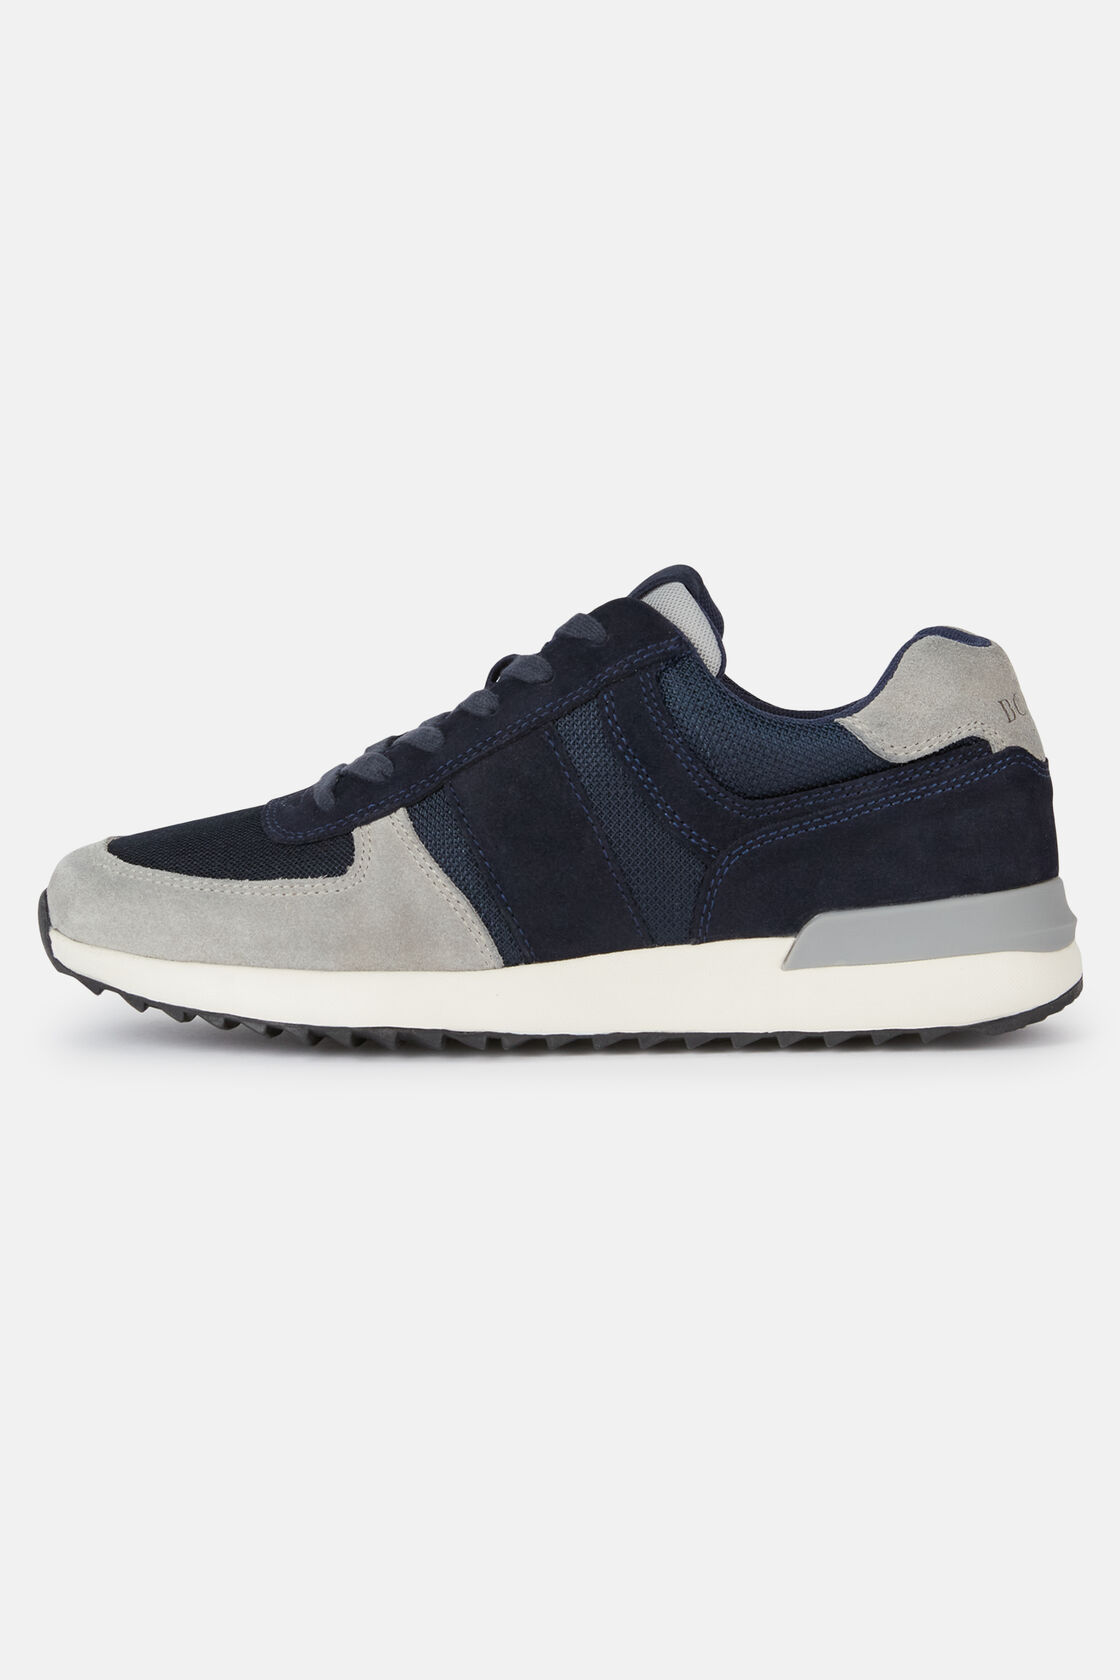 Tec Fabric Leather Sneakers Running, Navy blue, hi-res